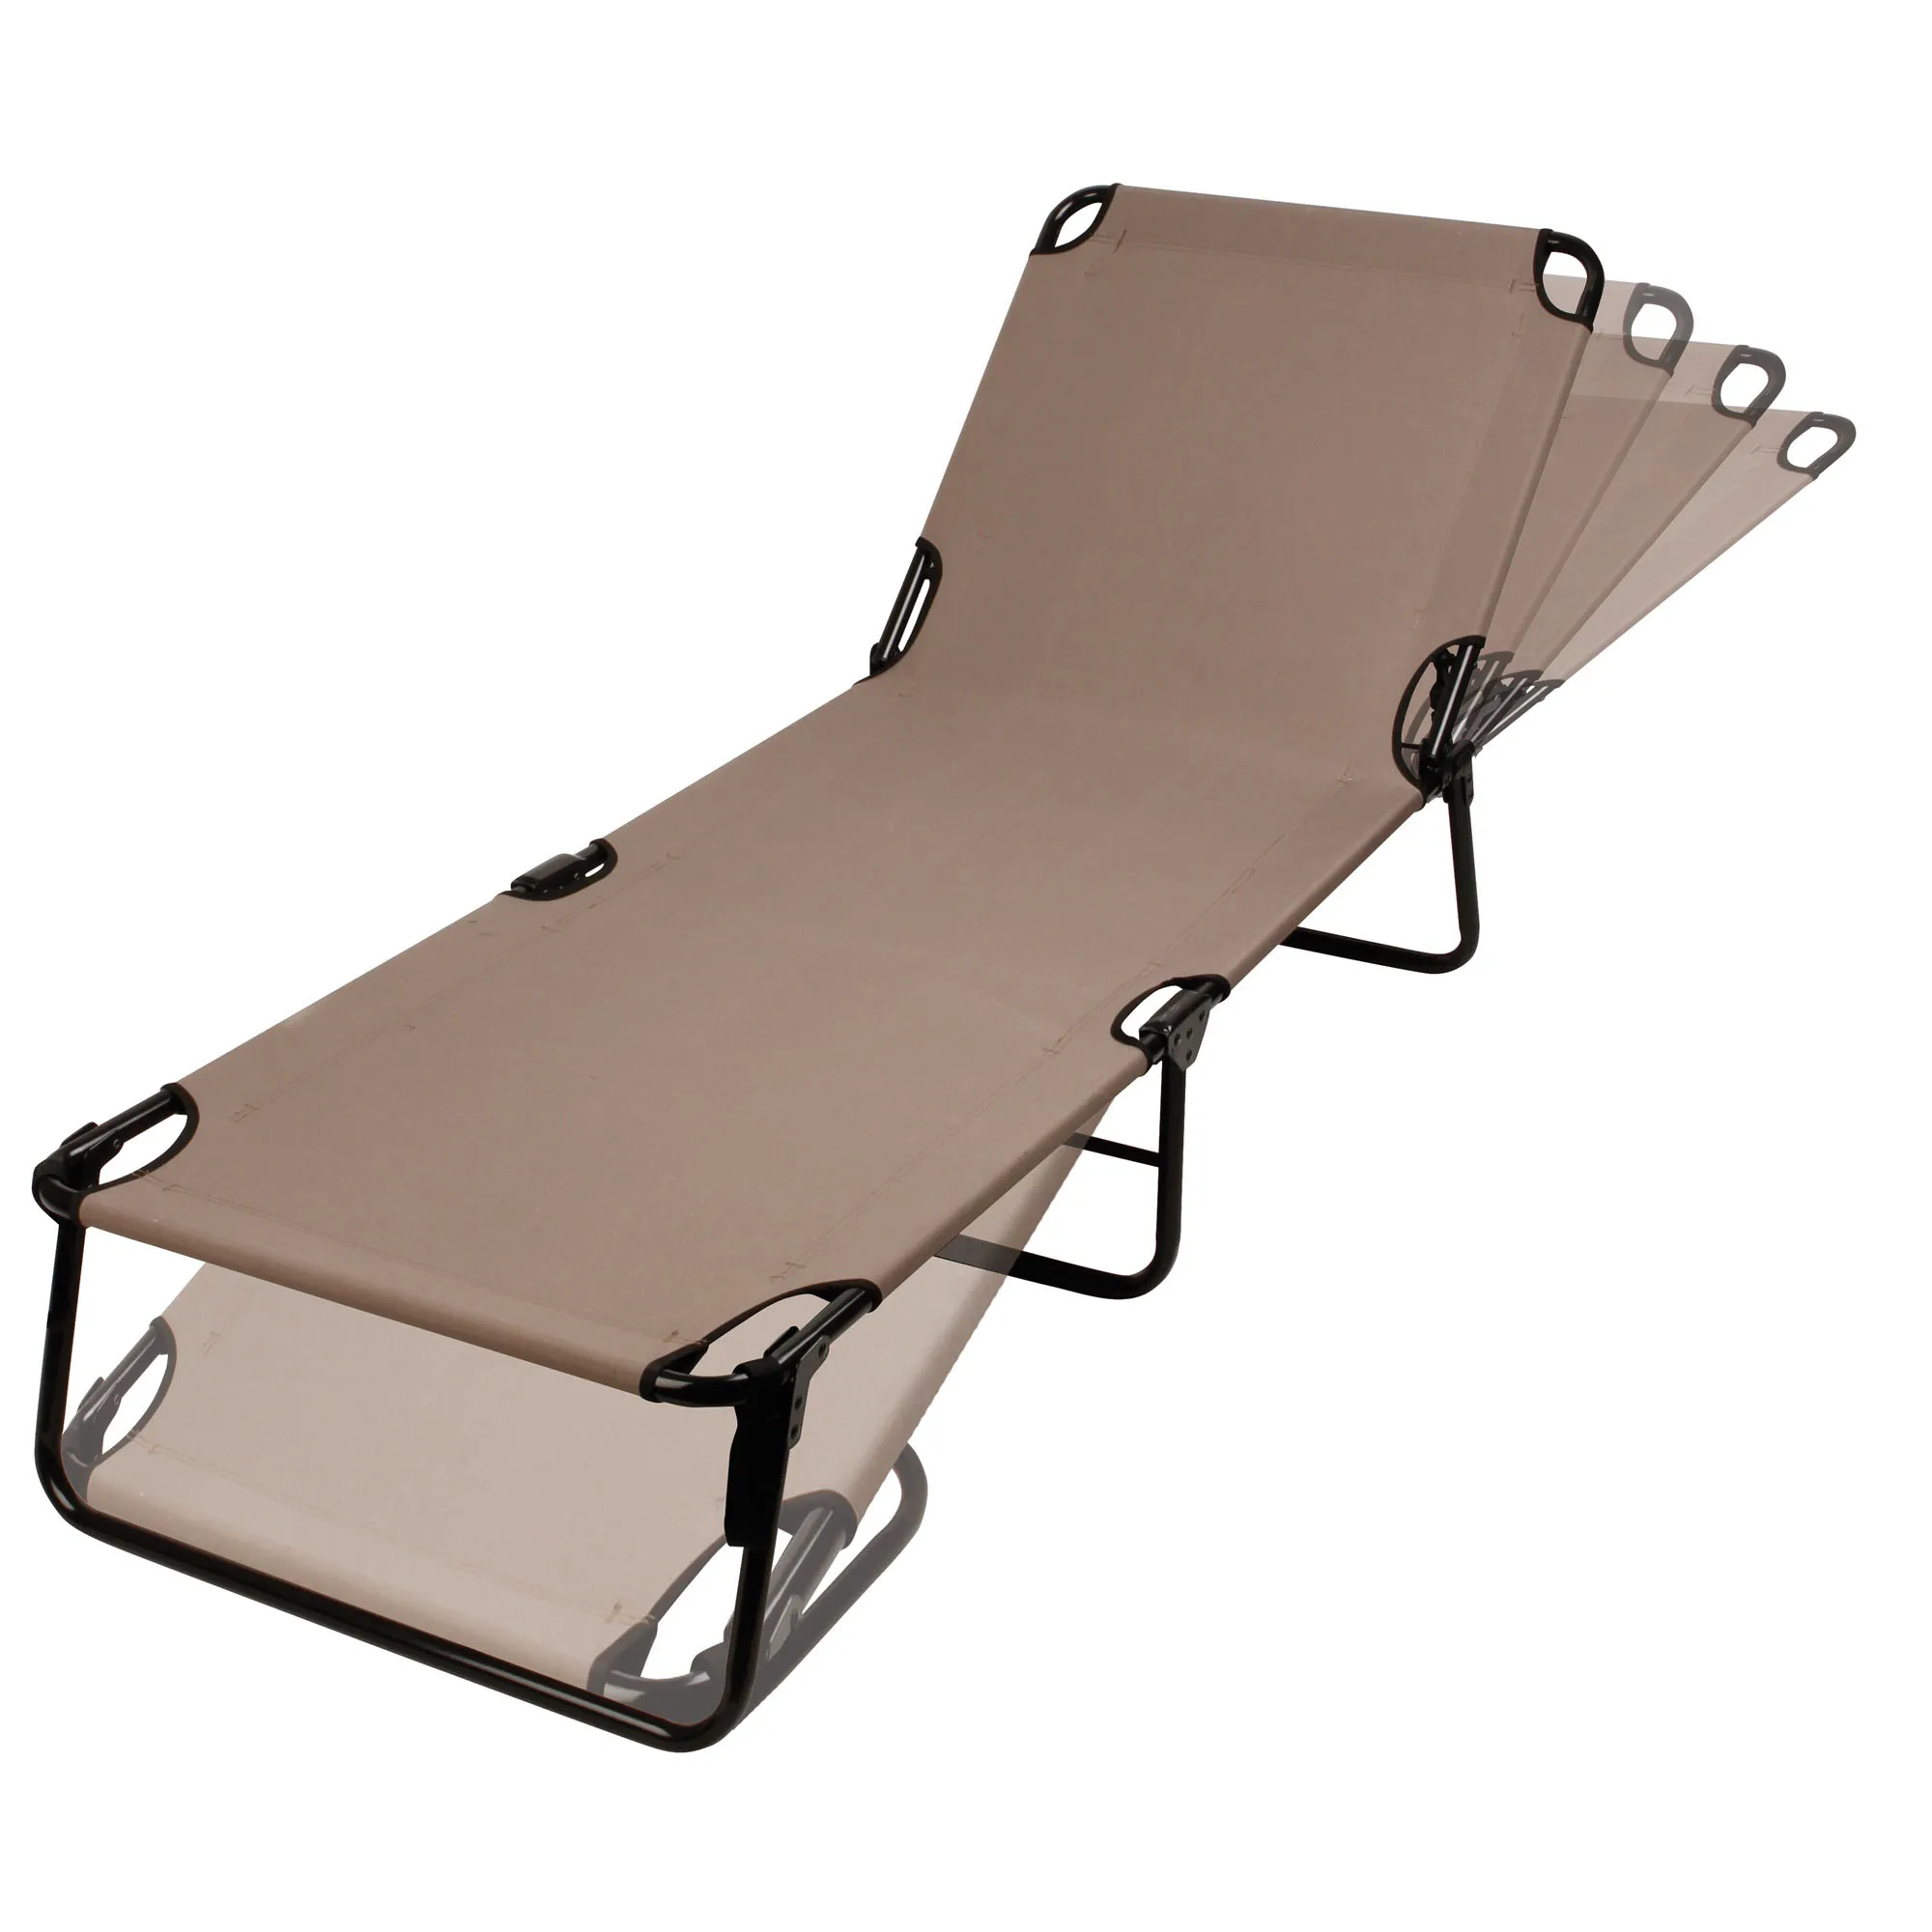 Portable Convertible Camping Cot, Fits A Person Up To 6'6